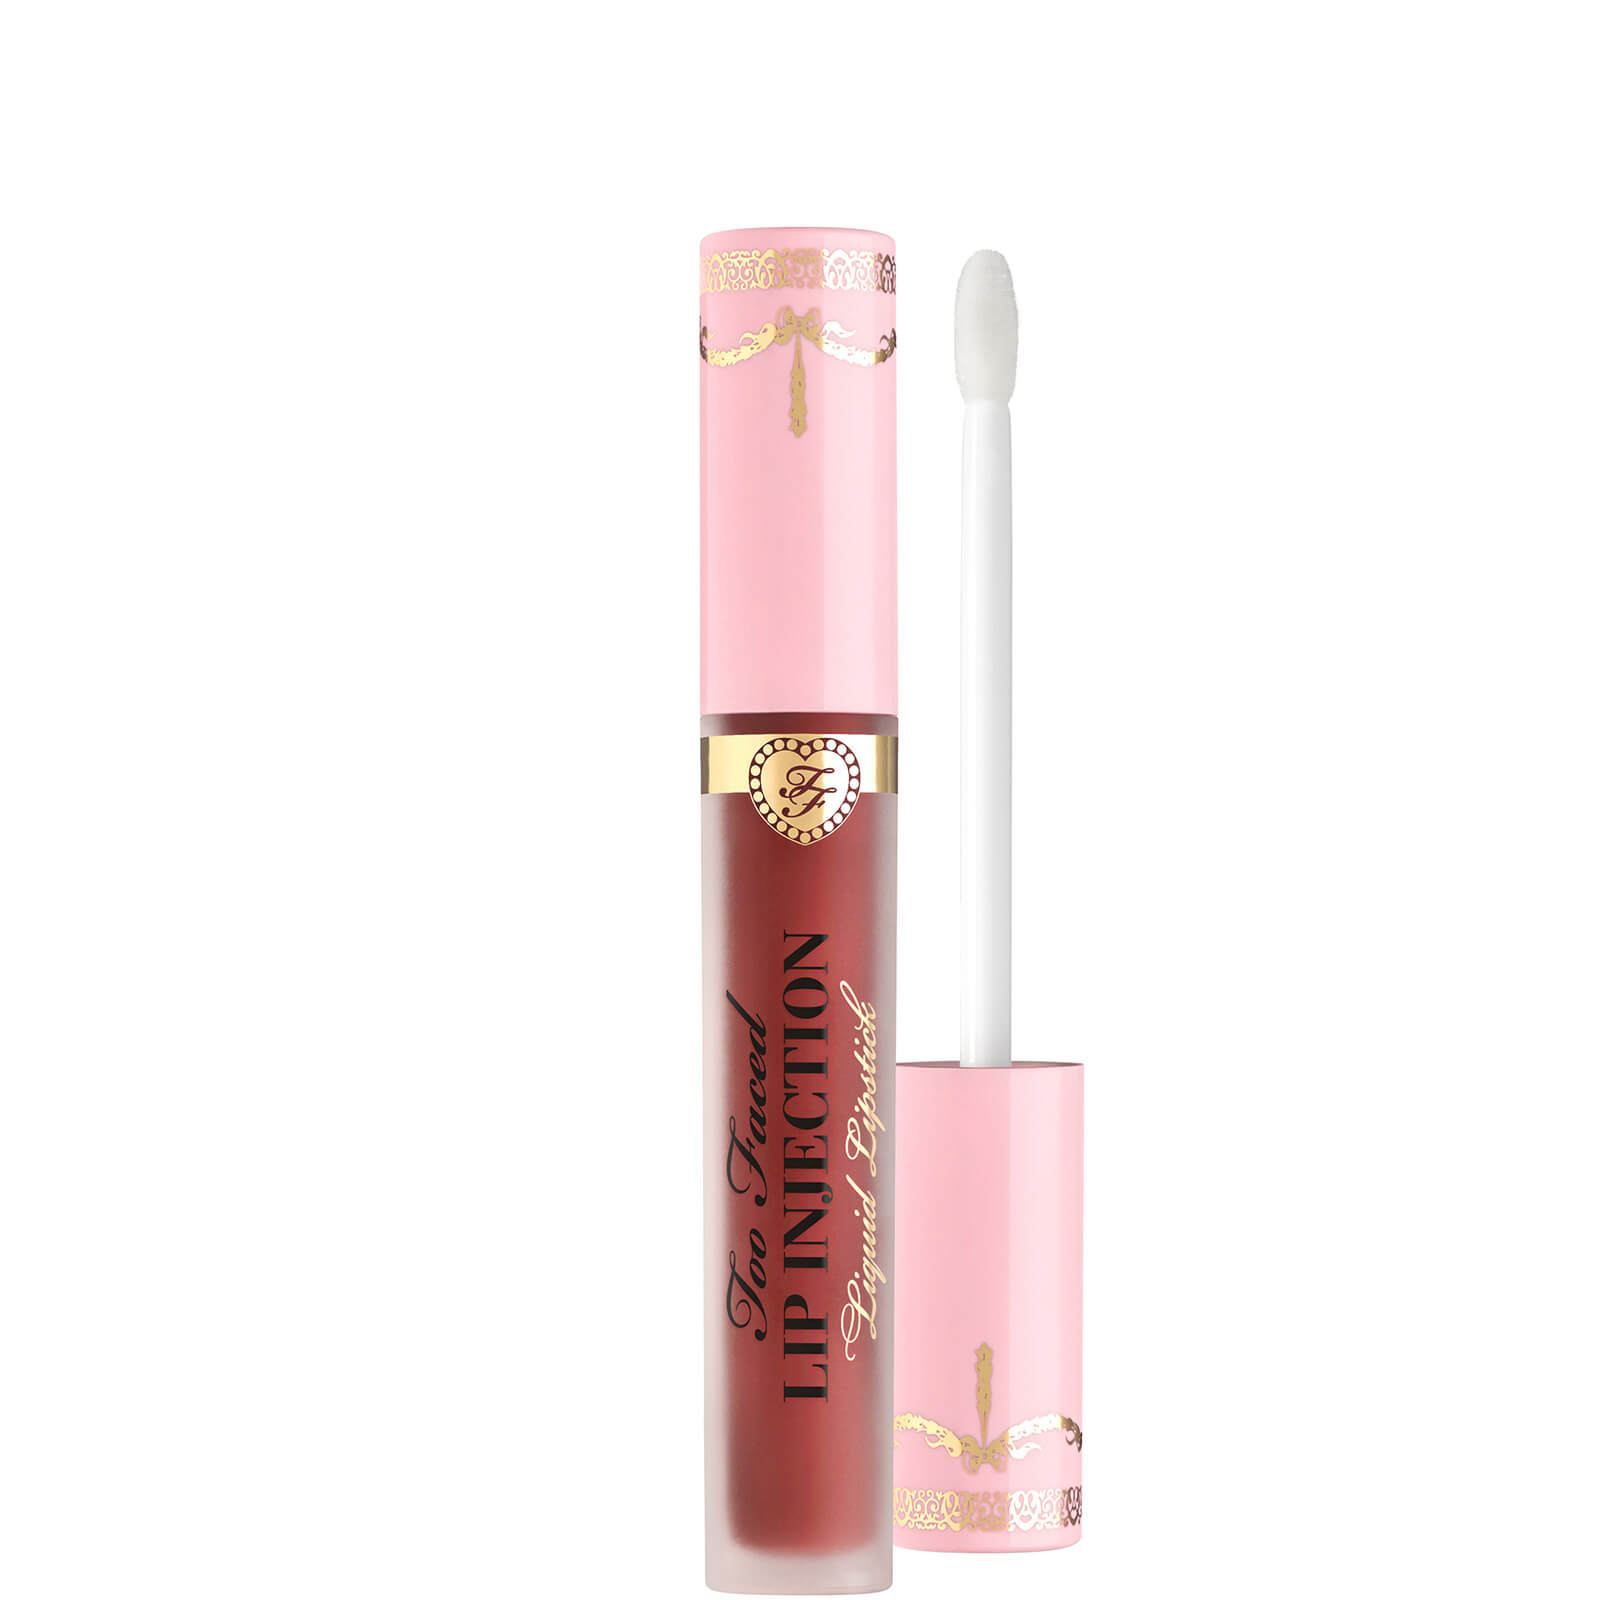 Too Faced Lip Injection Demi-Matte Liquid Lipstick 3ml (Various Shades) - Large & In Charge